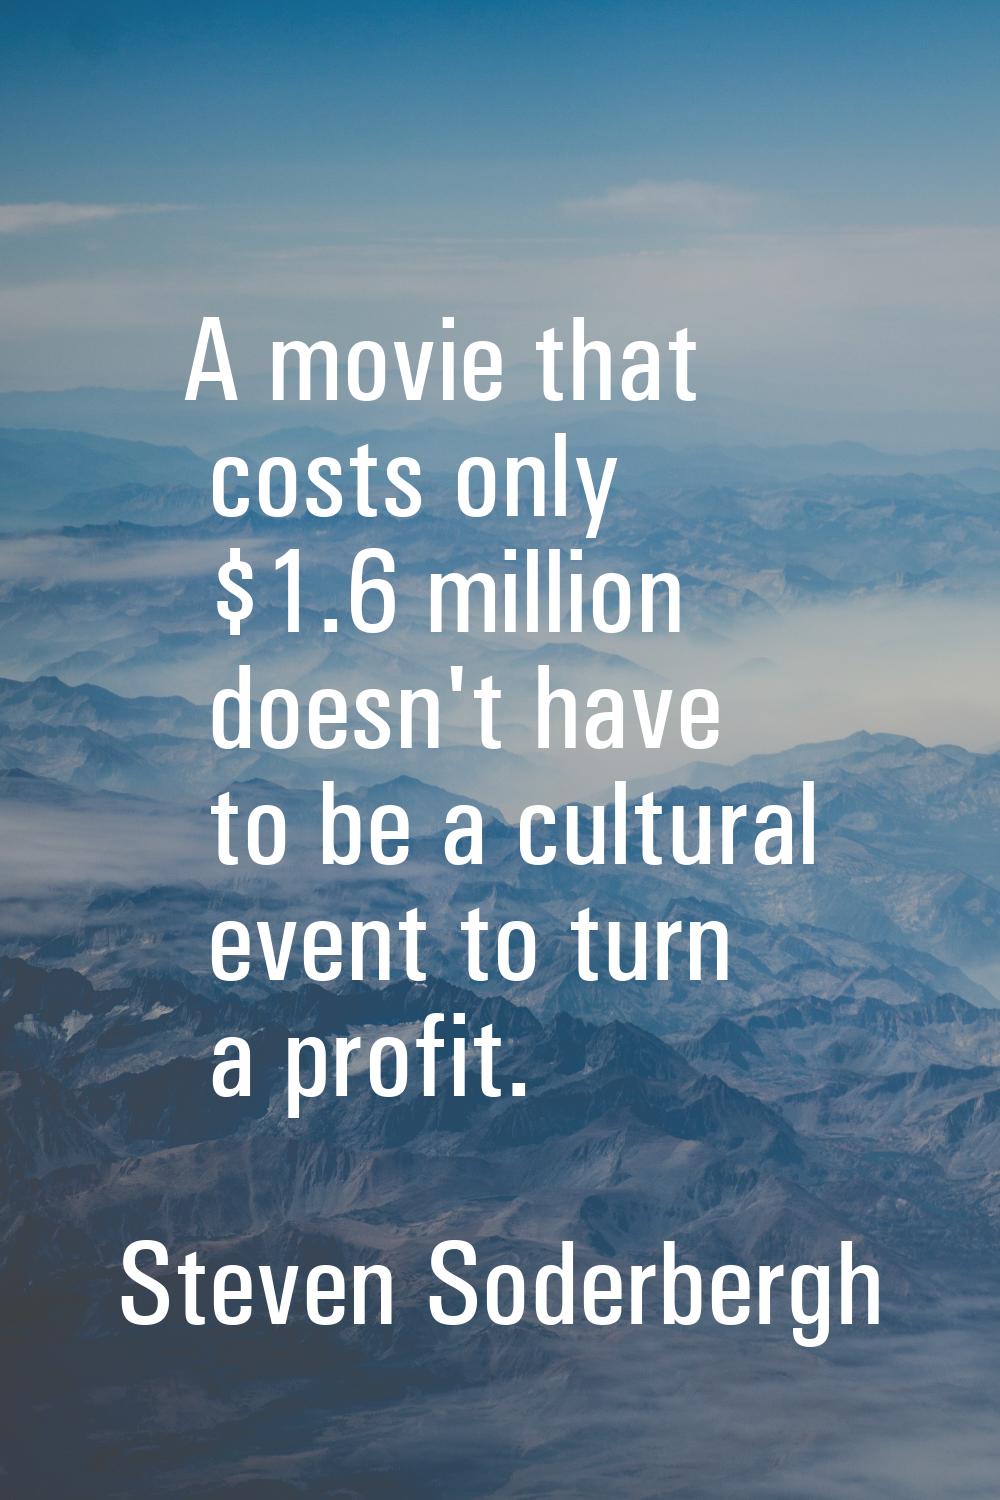 A movie that costs only $1.6 million doesn't have to be a cultural event to turn a profit.